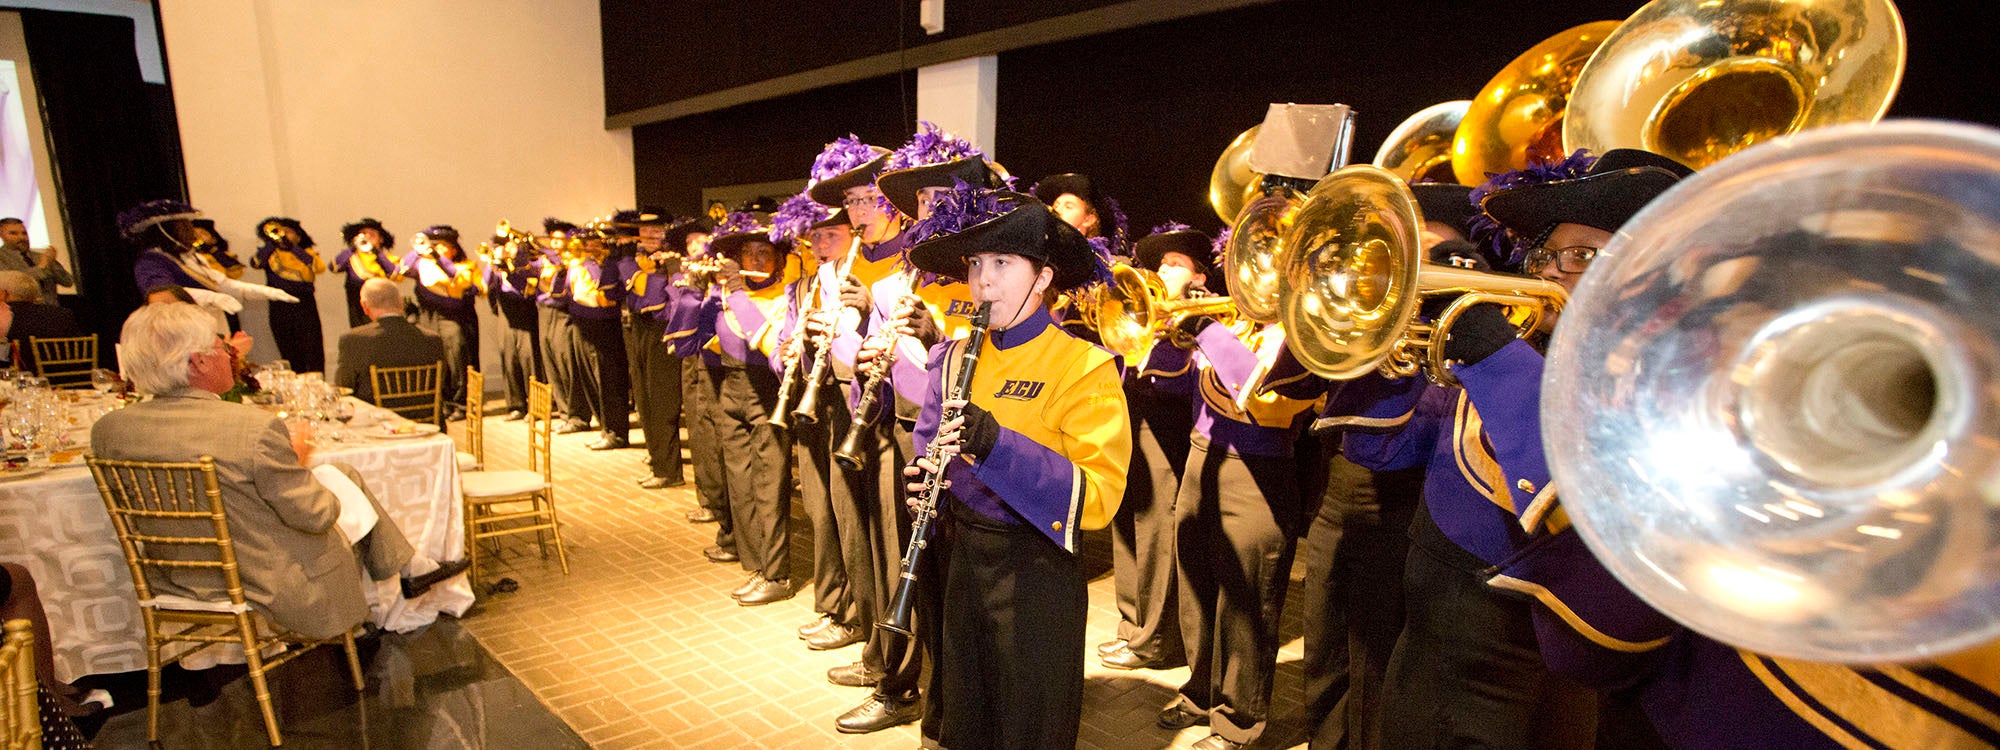 Members of the Marching Pirates provided musical entertainment for the Nov. 9 ECU Board of Trustees dinner, featuring the presentation of the Chancellor’s Amethysts. (Photos by Will Preslar)